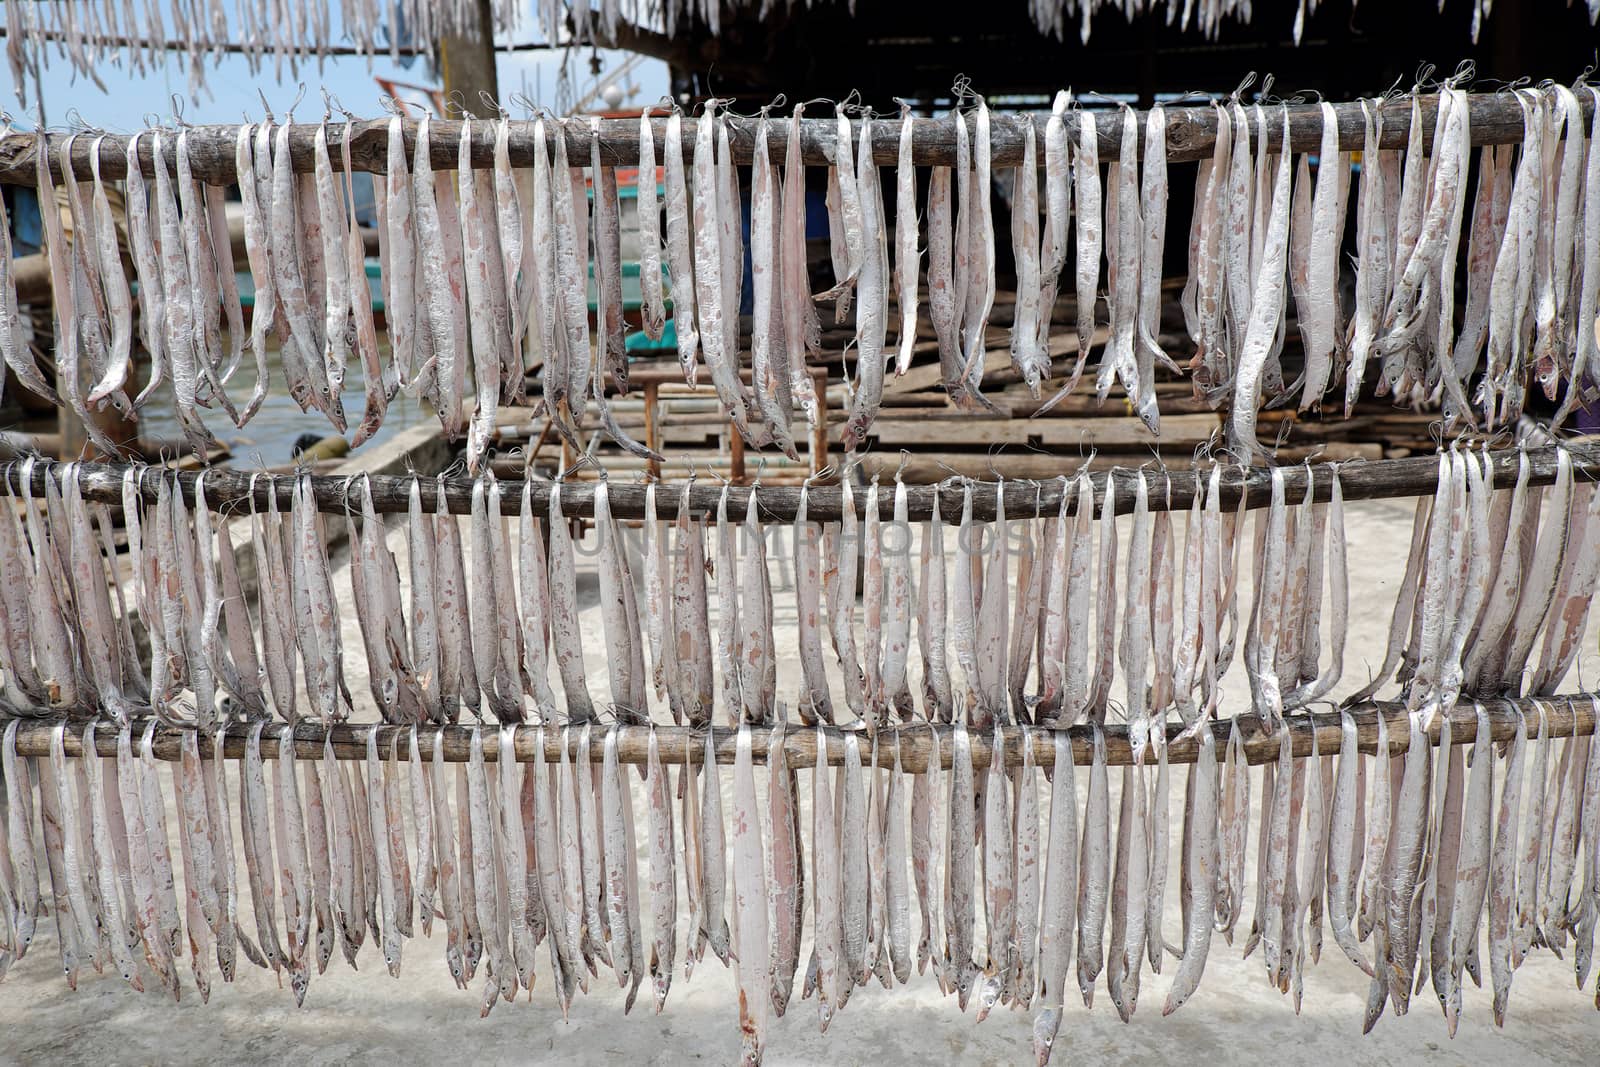 Seafood at Ca Mau fishing village, Mekong Delta, Vietnam. Dried fish is popular Vietnamese food, can store for long time